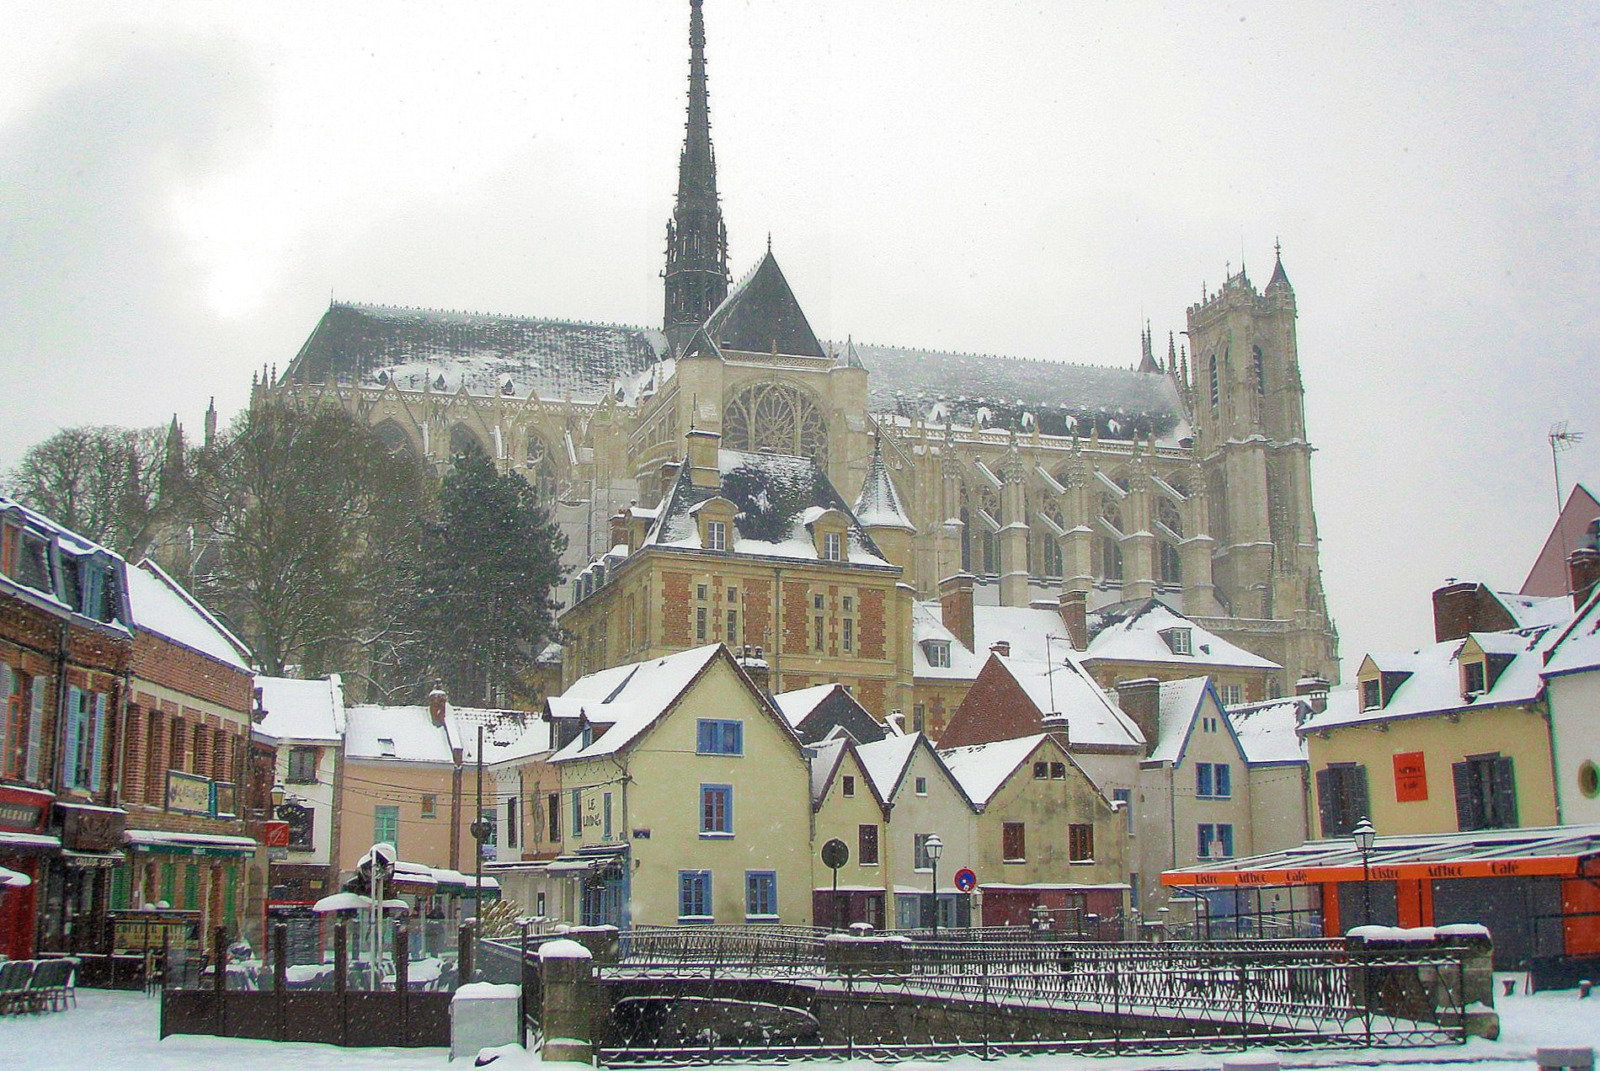 Amiens in Winter © Hugues80 - licence [CC BY-SA 3.0] from Wikimedia Commons